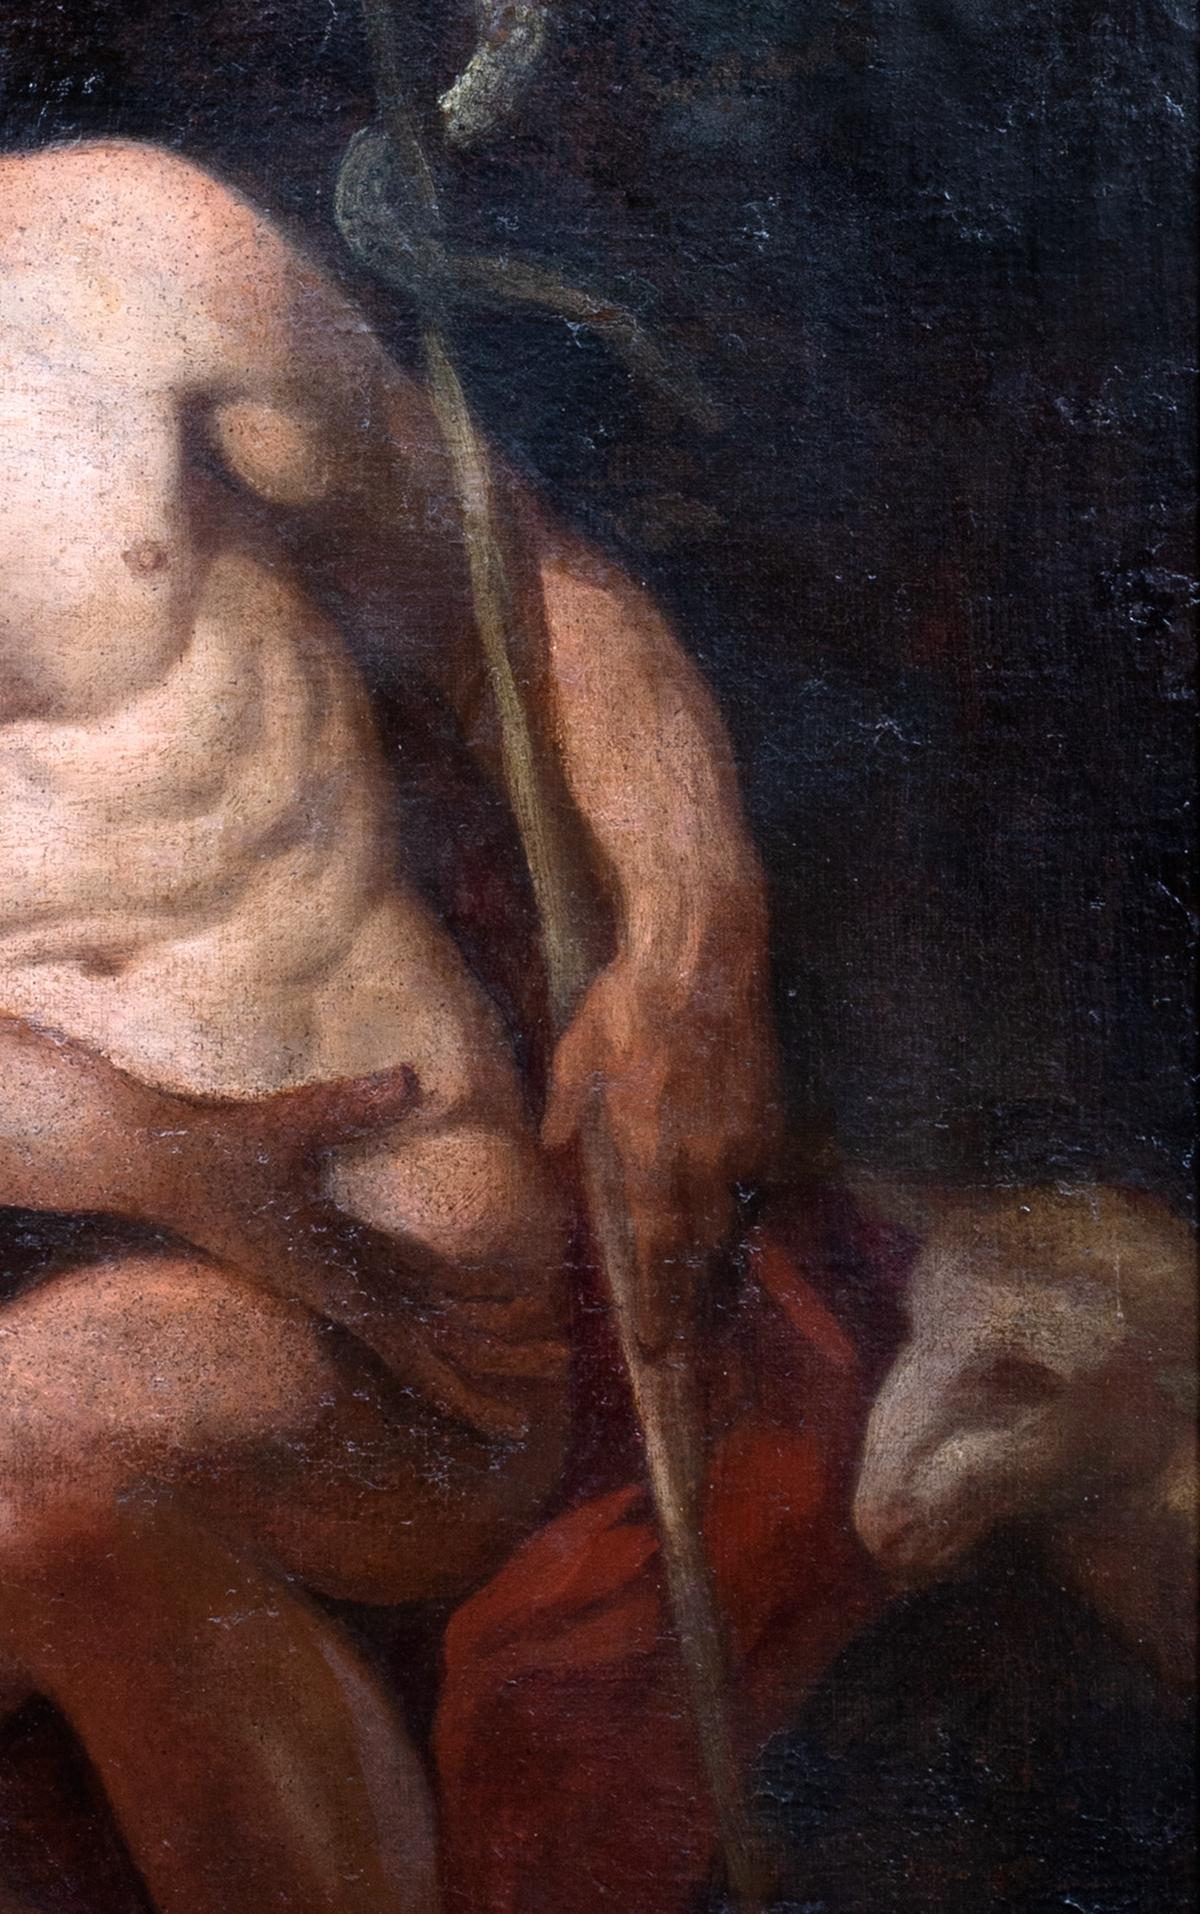 A Male Model As St John In The Wilderness, 17th Century

Italian Baroque School circa 1650

Large 17th Century Italian Baroque School depiction of a nude male as St John In The Wilderness, oil on canvas. Excellent quality and condition study of the